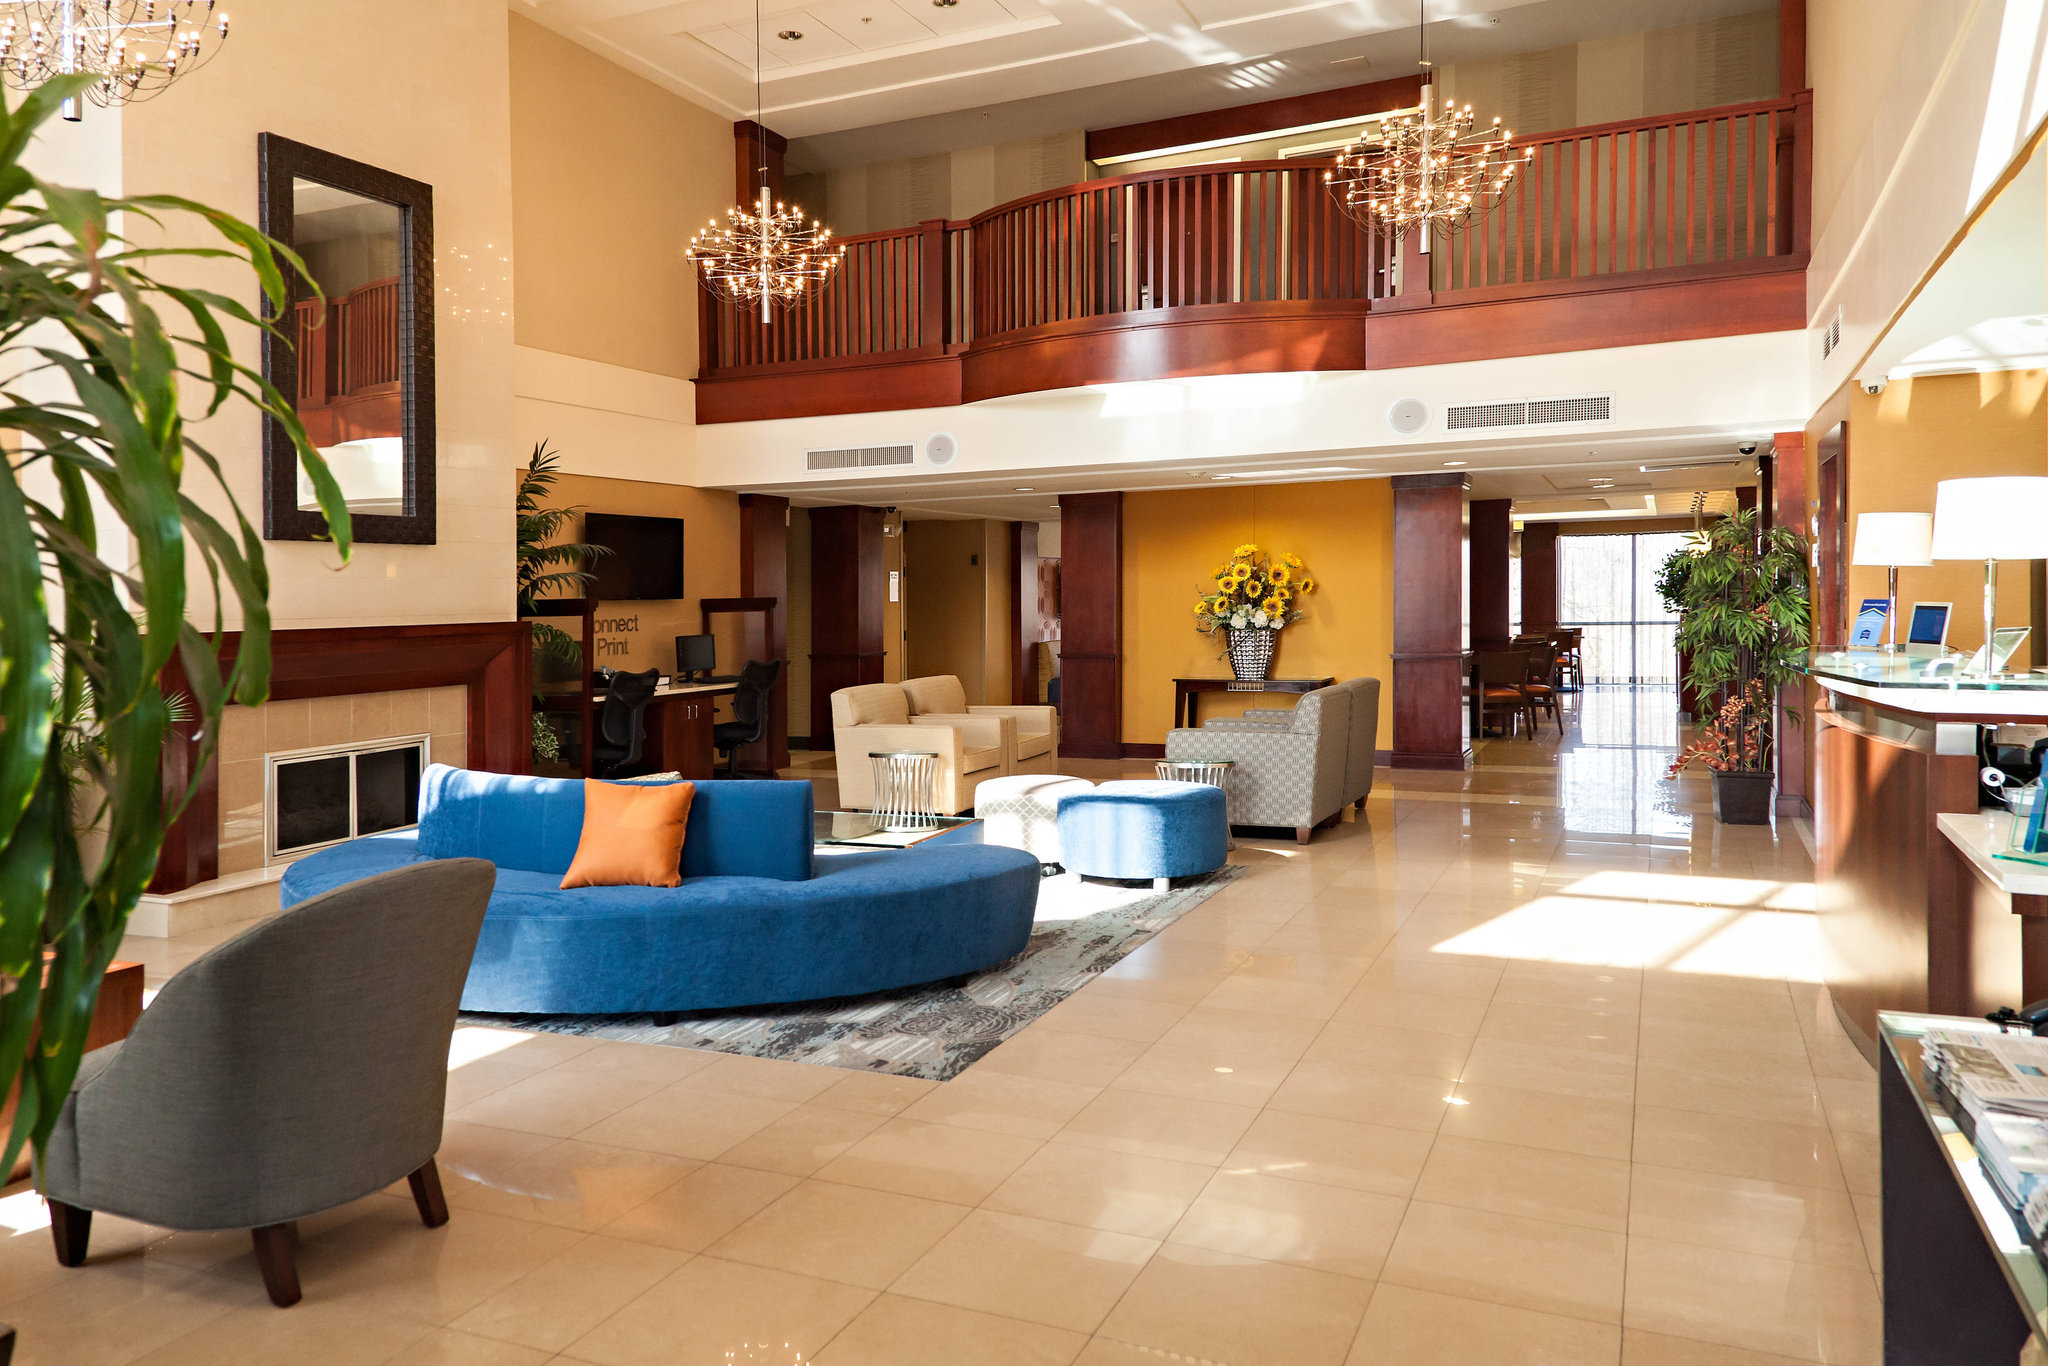 Fairfield Inn And Suites Somerset